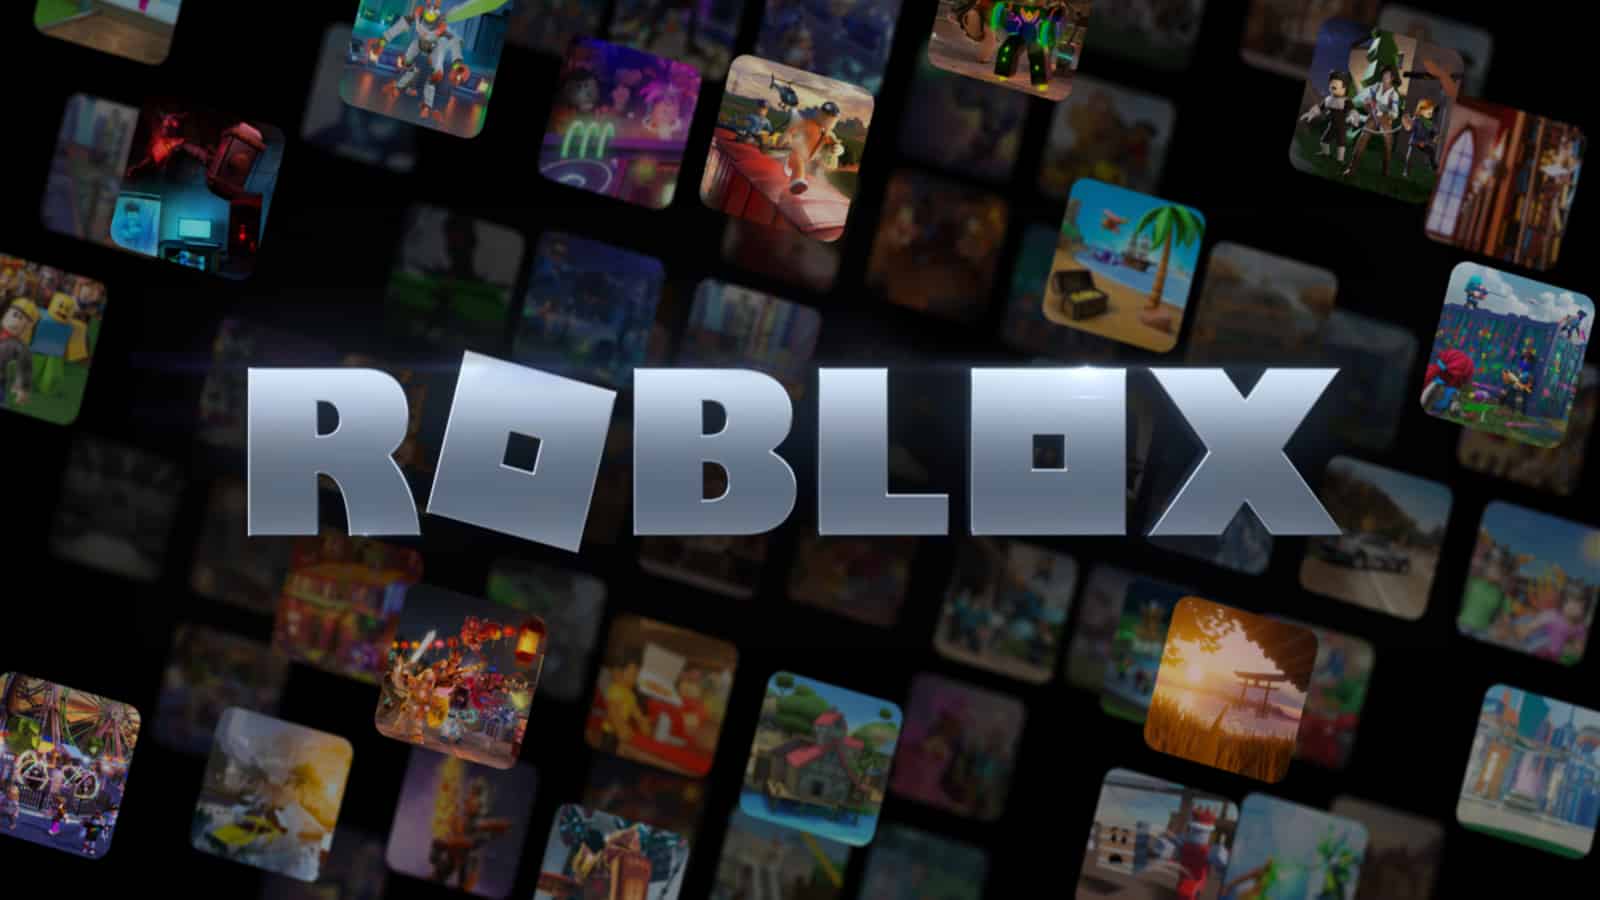 Roblox logo image showcasing many of the platform's most popular games